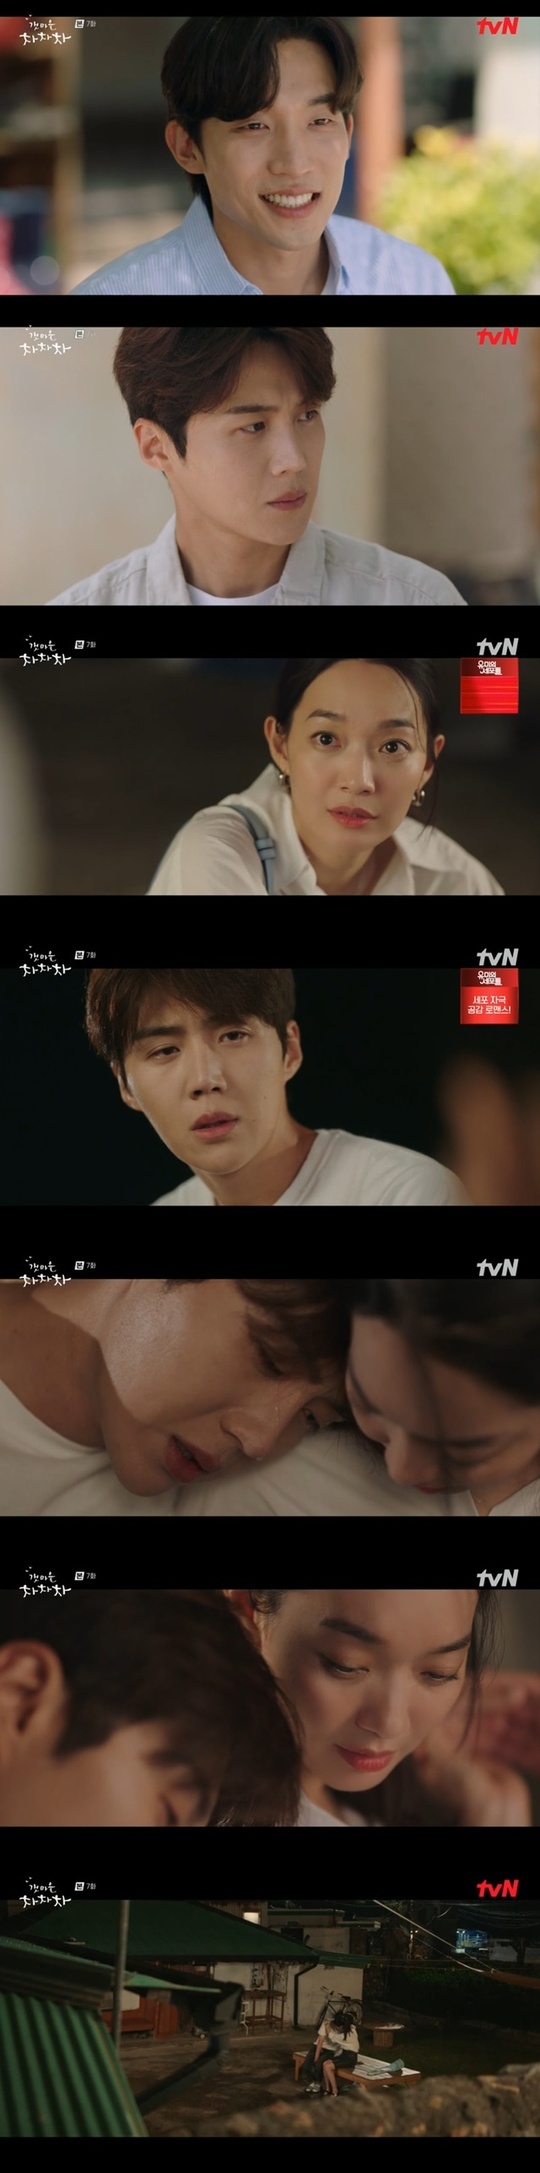 Kim Seon-ho tears up for Shin Min-aIn the 7th episode of TVNs Saturday Drama Car Car Car (playplayed by Shin Ha-eun/directed Yoo Jae-won), which was broadcast on September 18, Hong Doo-sik (played by Kim Seon-ho) was a fond drunken drunk to Yoon Hye-jin (Shin Min-a).Ji Sung-hyun (Lee Sang-Bun) introduced the resonant people as a PD who came to shoot an entertainment program, and Yoon Hye-jin (Shin Min-a) welcomed the reunion with his senior Ji Sung-hyun.Hong Doo-sik (Kim Seon-ho) learned that Ji Sung-hyun was a fidi and began to care about his relationship with Yoon Hye-jin.Yoon Hye-jin told Hong Doo-sik, Do not tell Sung Hyun senior about the night.Ji Sung-hyun asked for a field shooting guide while drinking with Hong Doo-sik and played a bet game when Hong Doo-sik refused.Ji Sung-hyun shot a canary cano and fell asleep all night while playing Game, and Yoon Hye-jin was also drunk and moved to sleep outside the house and fell asleep.The next morning, Yoon Hye-jin was seen with Ji Sung-hyun at Hong Doo-siks house, and was seen by Cho Nam-sook (Cha Chung-hwa).Ji Sung-hyun pointed to the house of Kim Adrian Methodist Episcopal Church (Kim Young-ok) as the filming location and asked him to leave the house for two nights and three days, but Kim African Methodist Episcopal Church opposed the association, saying, How do I empty the house I have lived for a lifetime?Kim African Methodist Episcopal Church did not move even if Hong Doo-sik persuaded him, and Ji Sung-hyun resigned, saying, There was a lot of excuses.But Ji Sung-hyun, who came out of the house of Kim Adrian Methodist Episcopal Church, declared, I do not shoot it at that house or shoot it.Ji Sung-hyun ate at a sushi restaurant in Yeo Hwa-jeong (Lee Bong-ryun) with the introduction of Hong Doo-sik, then went shopping in the market, and tried to turn his mind around by presenting it to Kim Adrian Methodist Episcopal Church.Ji Sung-hyun approached Kim African Methodist Episcopal Church, saying, I just came to play.Pyo Mi-sun (played by Gong Min-jung) asked the recipient of the 1.4 billion lottery prize, which was the third mystery of the resonance, and bought two lottery tickets and forced him to present it to Choi Eun-cheol (played by Kang Hyung-seok).Jang Yeong-guk (Humanism) told his ex-wife Yeo Hwa-jung that he would eat with Yoo Cho-hee, who is in love with him, and Yeo Hwa-jung beat Jang Yeong-guks slap to catch the worm and insisted, Lets eat together.Jang Young-guk slipped while taking a shower expecting a meal with Yoo Cho-hee and could not move with his waist, and when Jang Young-guk did not appear, Yeo Hwa-jung and Yoo Cho-hee came home together and helped Jang Young-guk, who had fallen down.Yoon Hye-jin went to return his wallet left by Kim African Methodist Episcopal Church and helped wash the blanket with Hong Doo Sik.Yoon Hye-jin recalled Memory, which had been forgotten for a while in Hongdusik and skinship, but did not fully recall the Memory.When Ji Sung-hyun and Jun (Sung Tae-min) came to the place, Kim Adrian Methodist Episcopal Church prepared rice, and June admired it as the first time she had worked since she was a child.Ji Sung-hyun said, I like to have people gather and play crowded.It seems to be the end of life, said Kim Adrian Methodist Episcopal Church, who moved his mind to allow the house to be filmed.Hong Doo-sik proceeded with the contract, and Ji Sung-hyun asked, Do you have a meeting with Hye-jin? When Hong Doo-sik answered, No, I do not think so? Ji Sung-hyun smiled, Thank God.